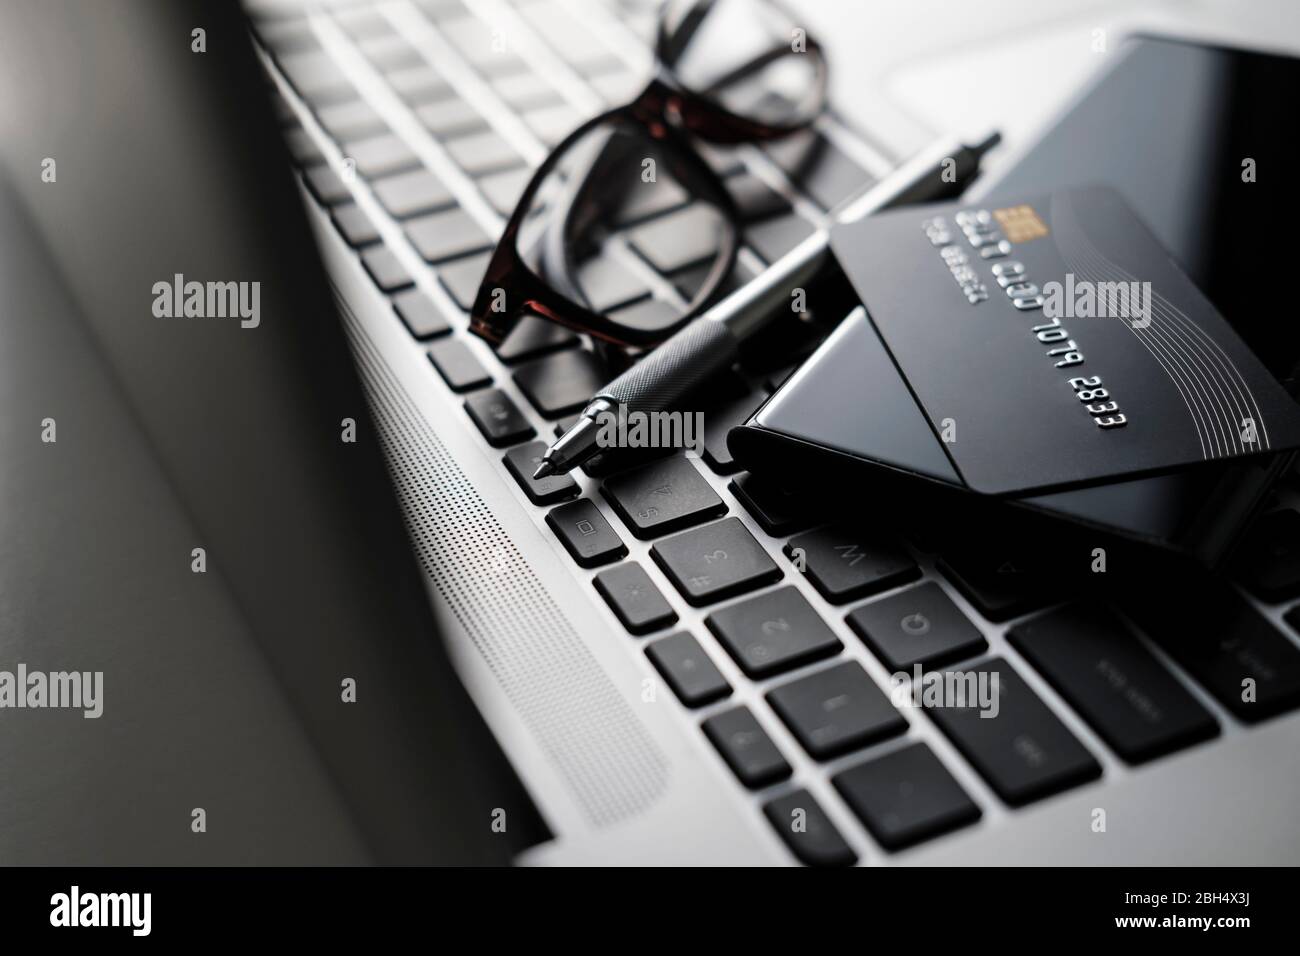 Credit card, smart phone, pen and glasses on laptop keyboard Stock Photo